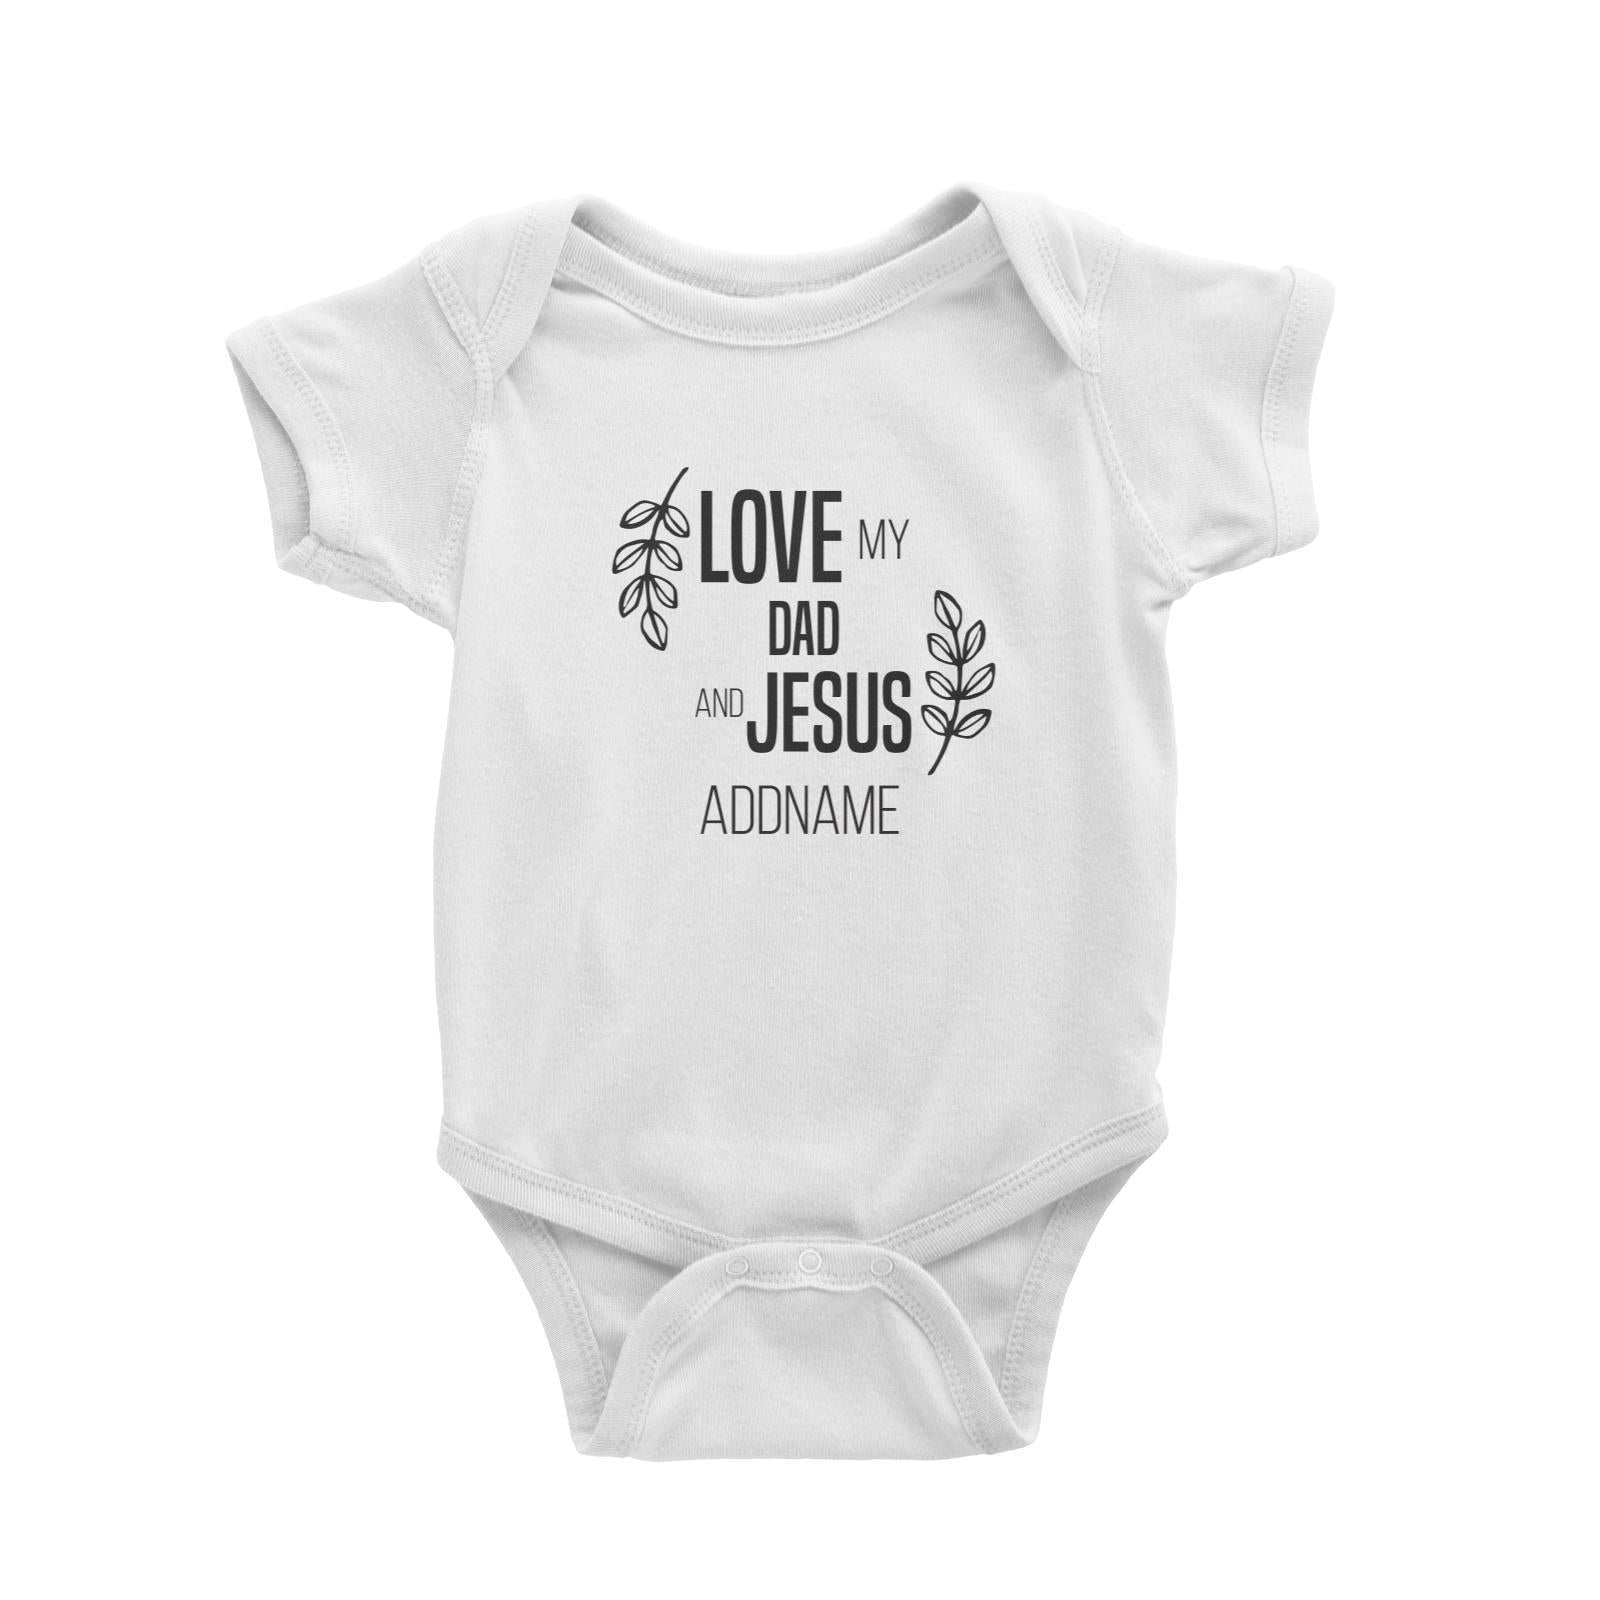 Christian Series Love My Dad And Jesus Addname Baby Romper